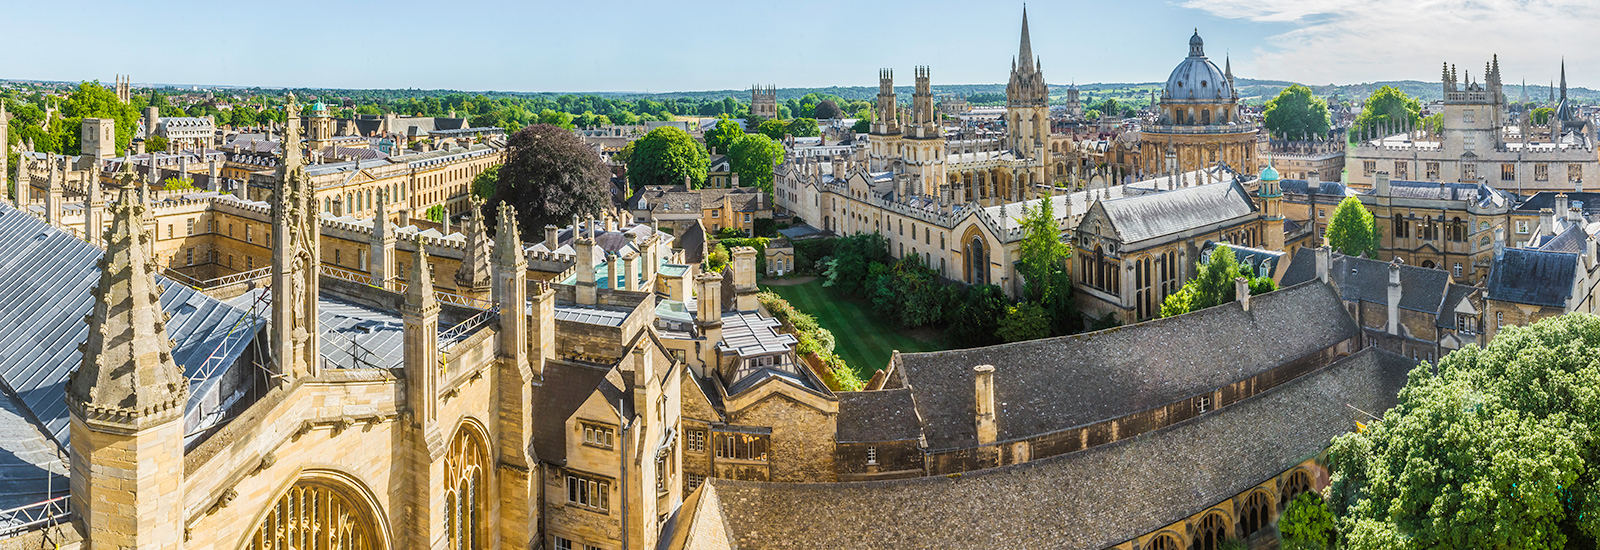 research funding oxford